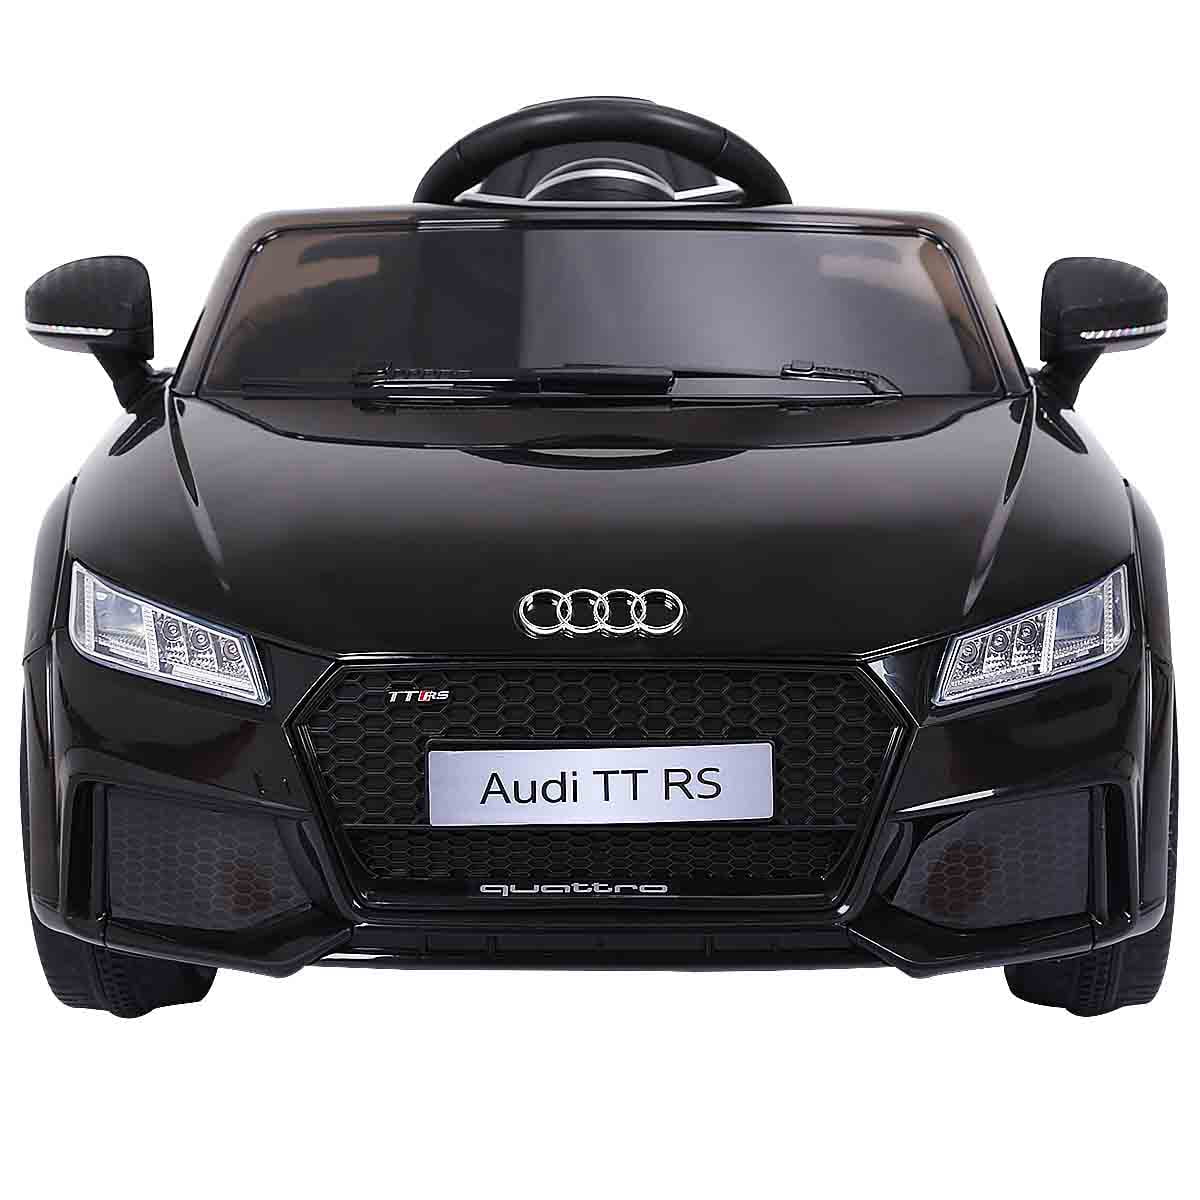 Topbuy Audi TT RS Mini Ride on Car 12V Electric Kids Toy Buggy w/ Remote MP3 